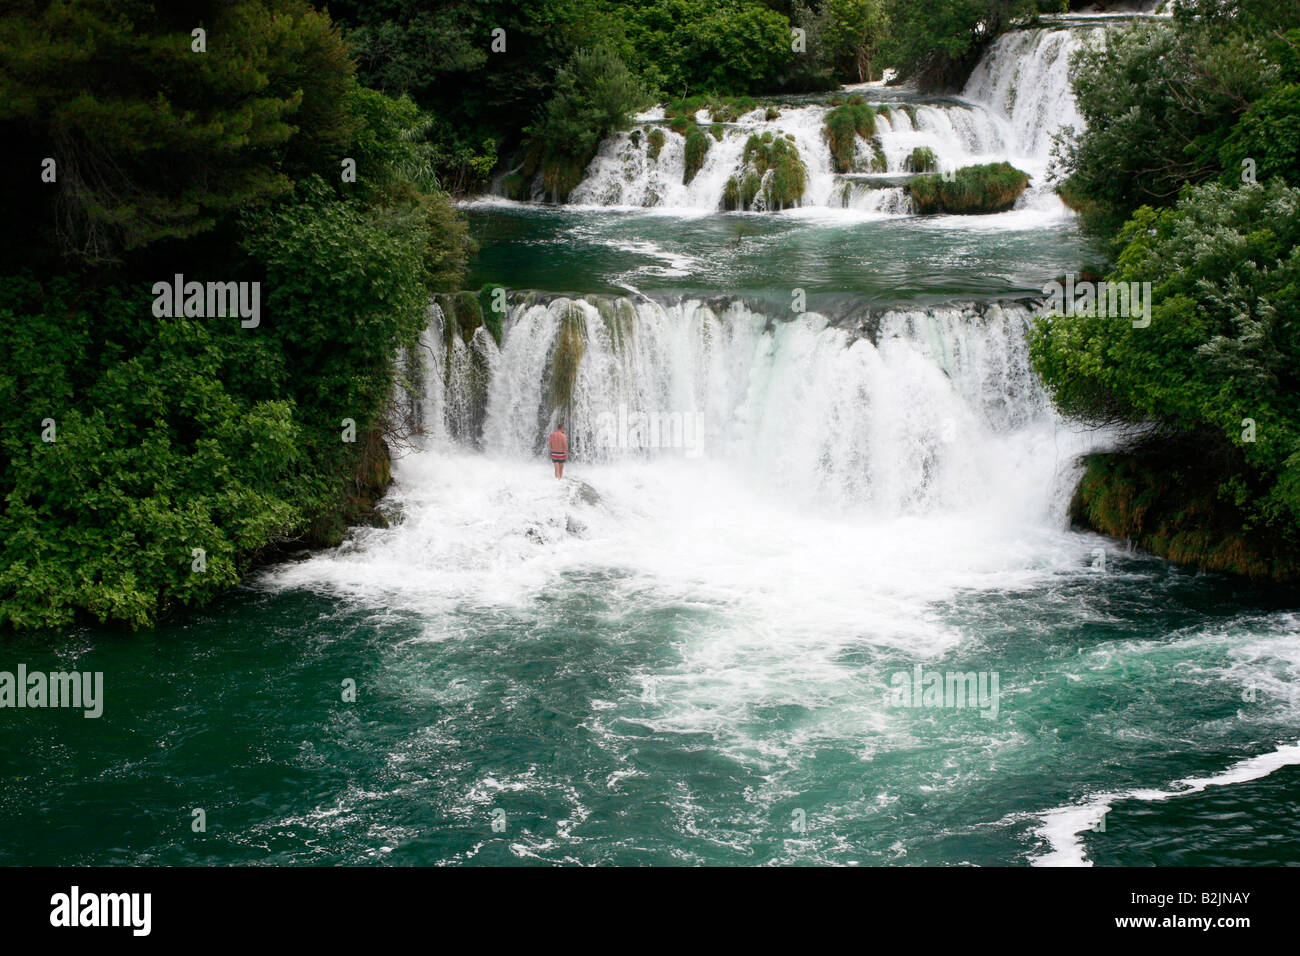 Croatian holidaymaker enjoying swimming in the spectacular waterfalls of the Krka National Park in Croatia Stock Photo